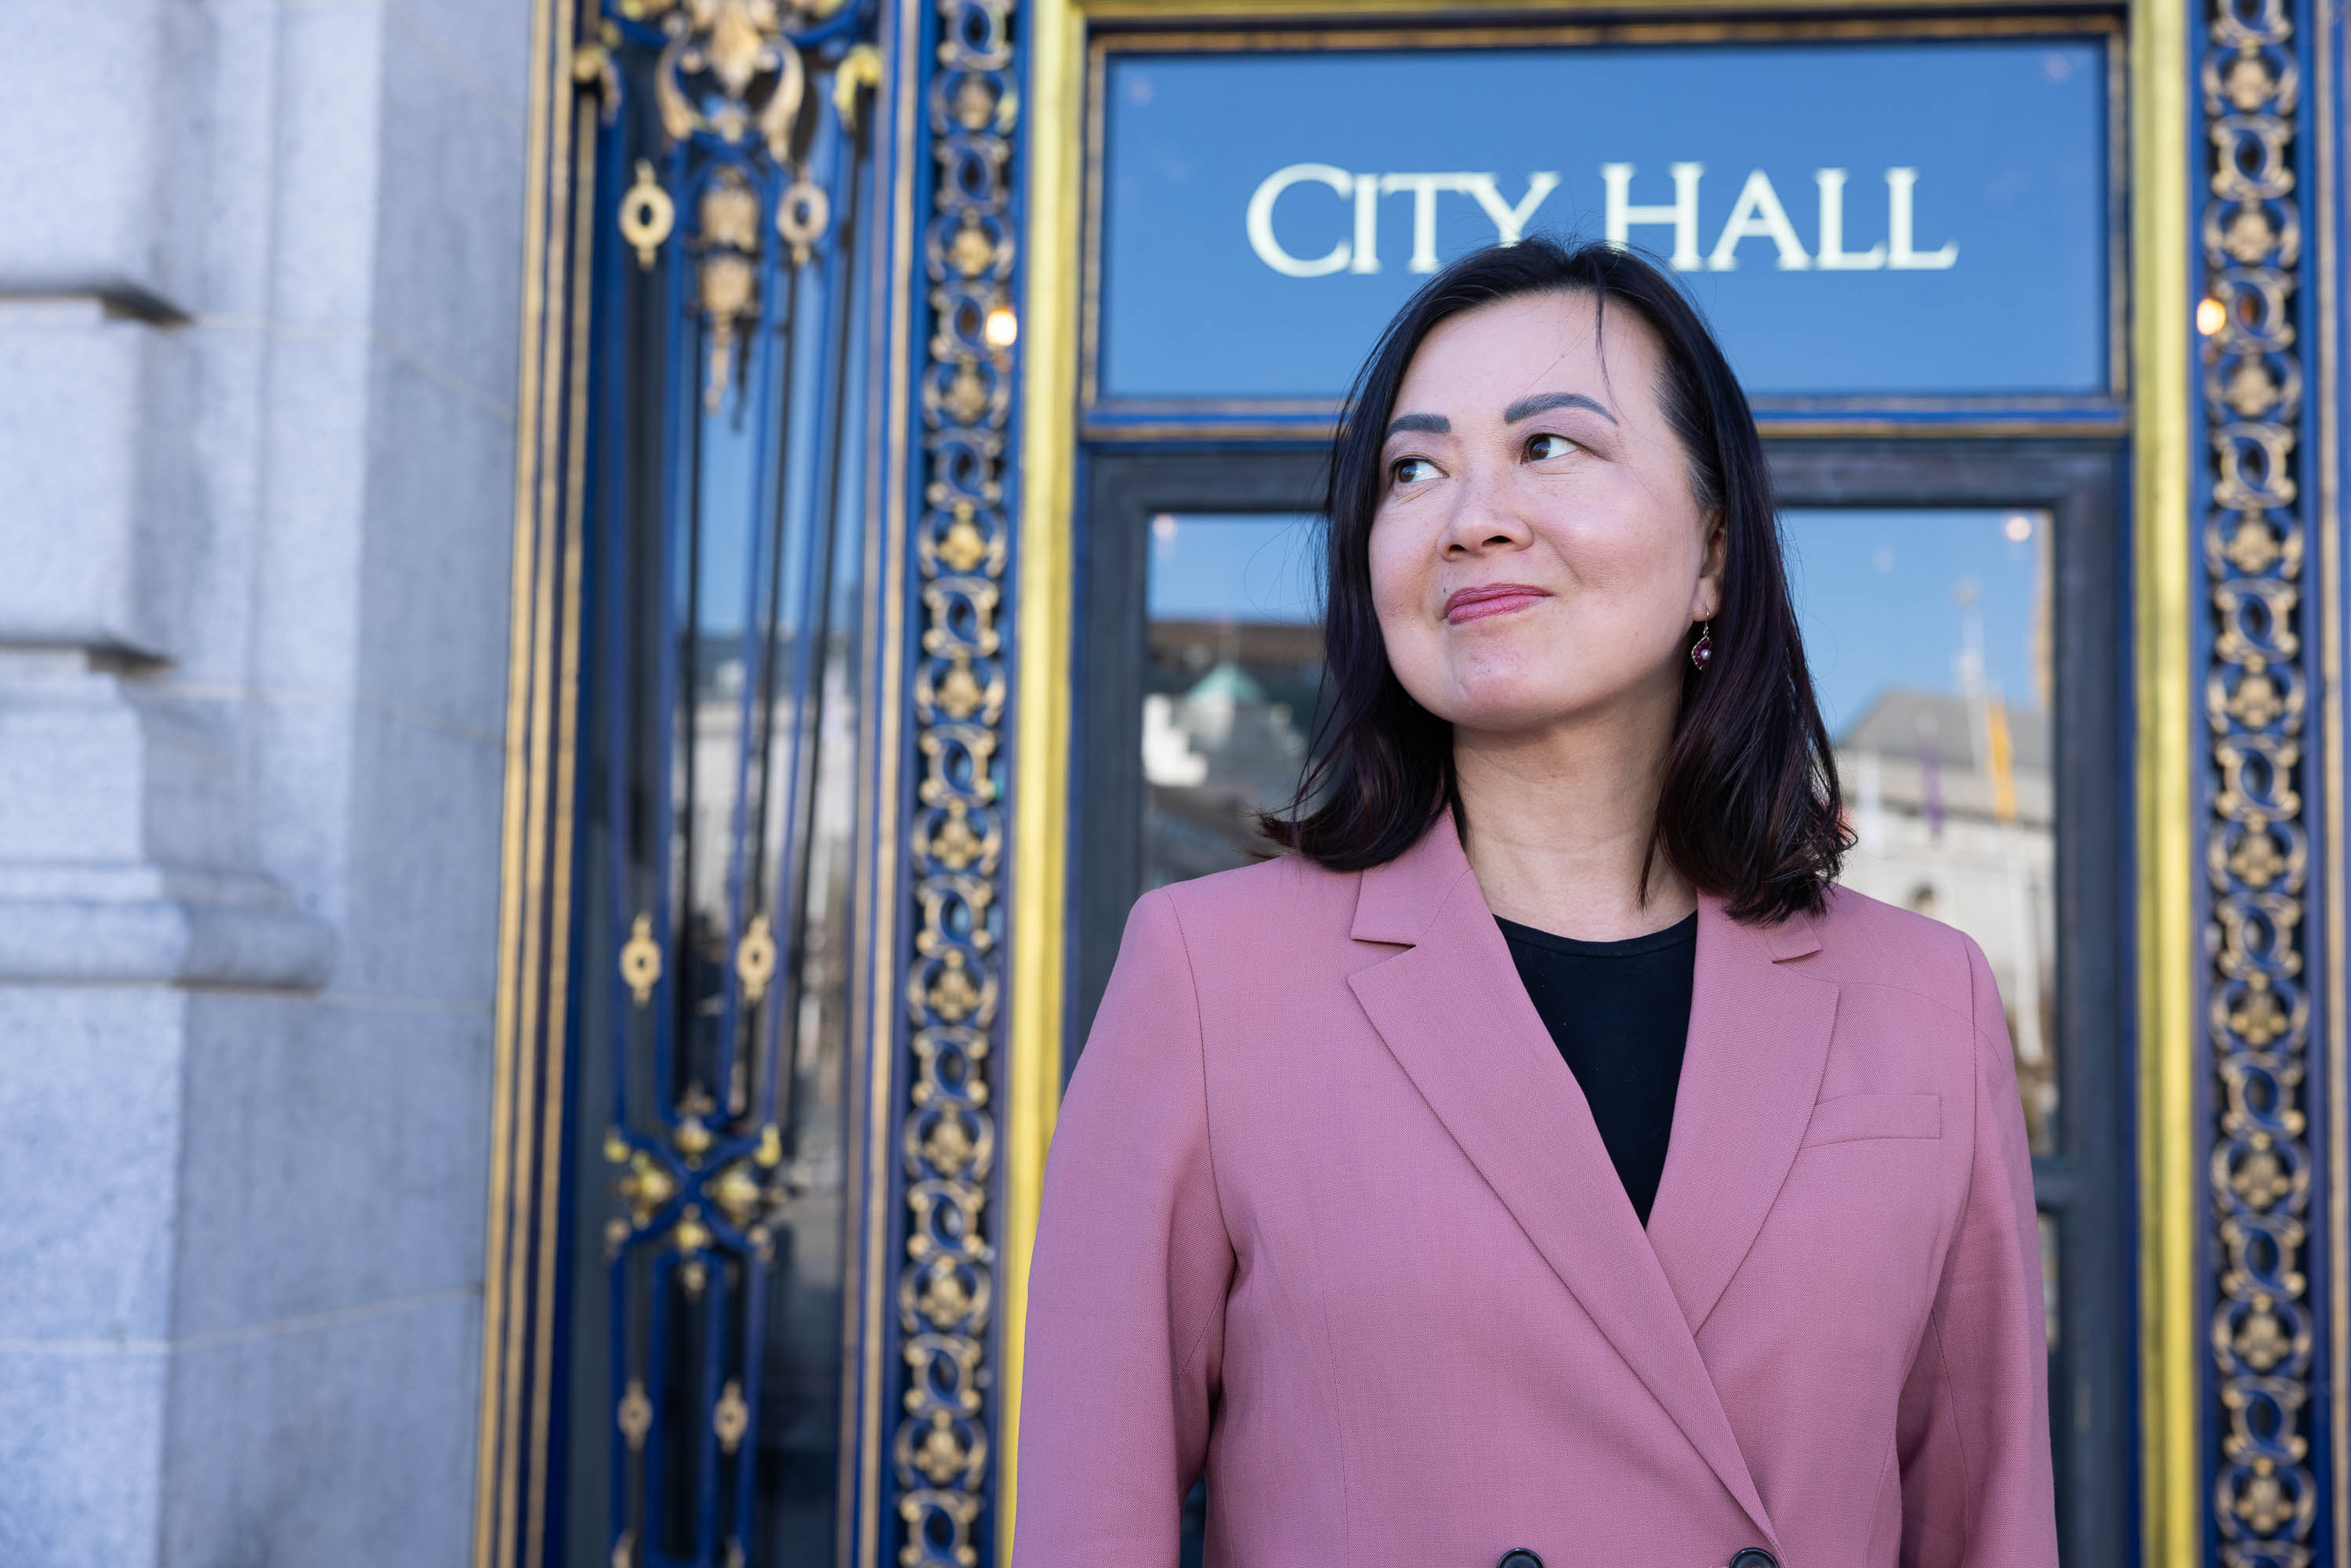 A woman in a pink blazer stands before a "City Hall" sign on a blue, gold-trimmed door.